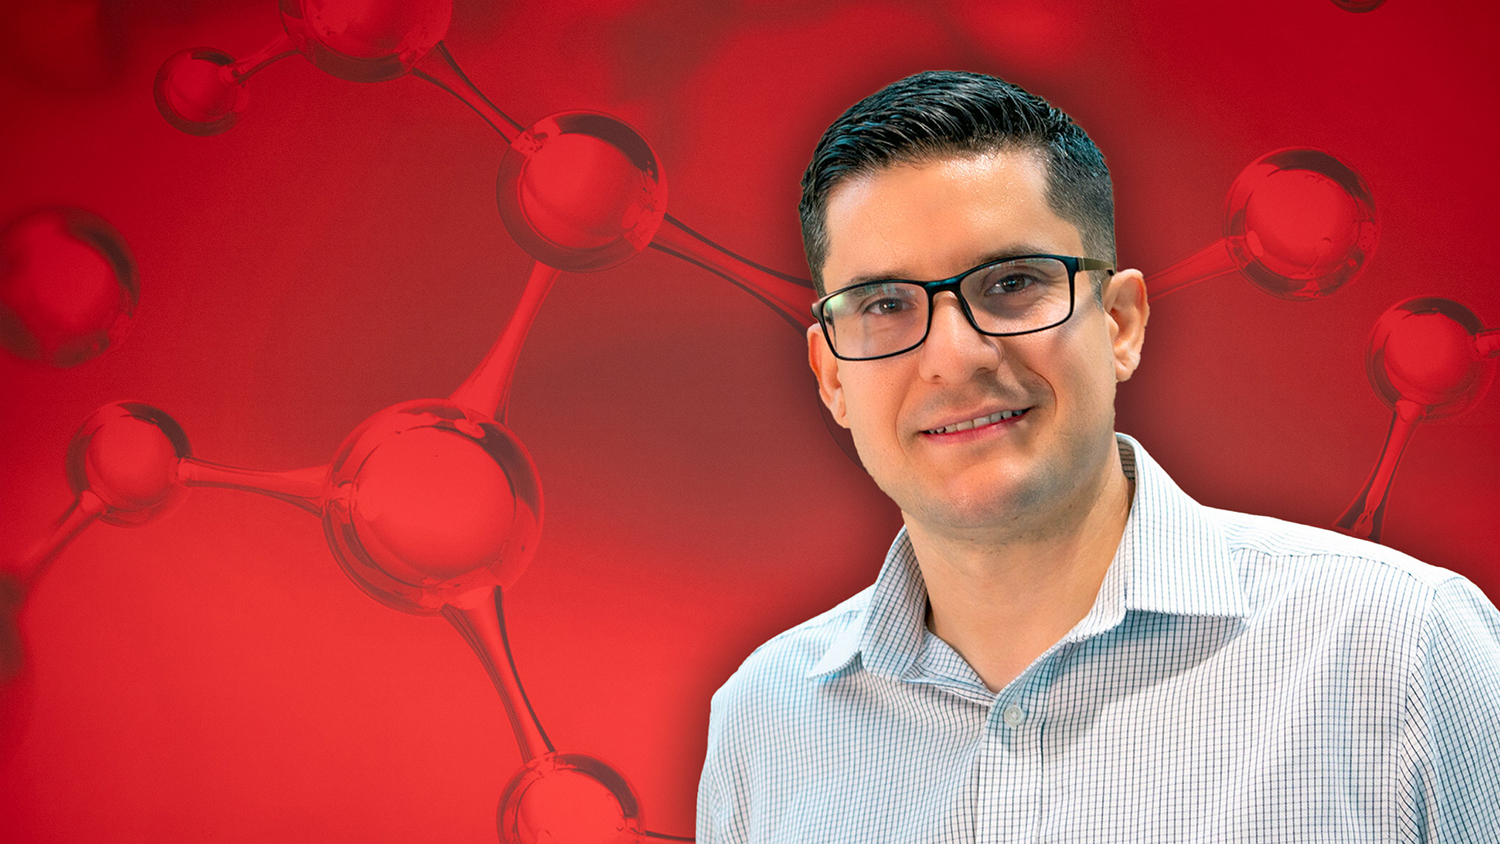 Adolfo Escobedo wearing glasses and white shirt with a light blue grid design in front of a red background showing enlarged molecular structures.